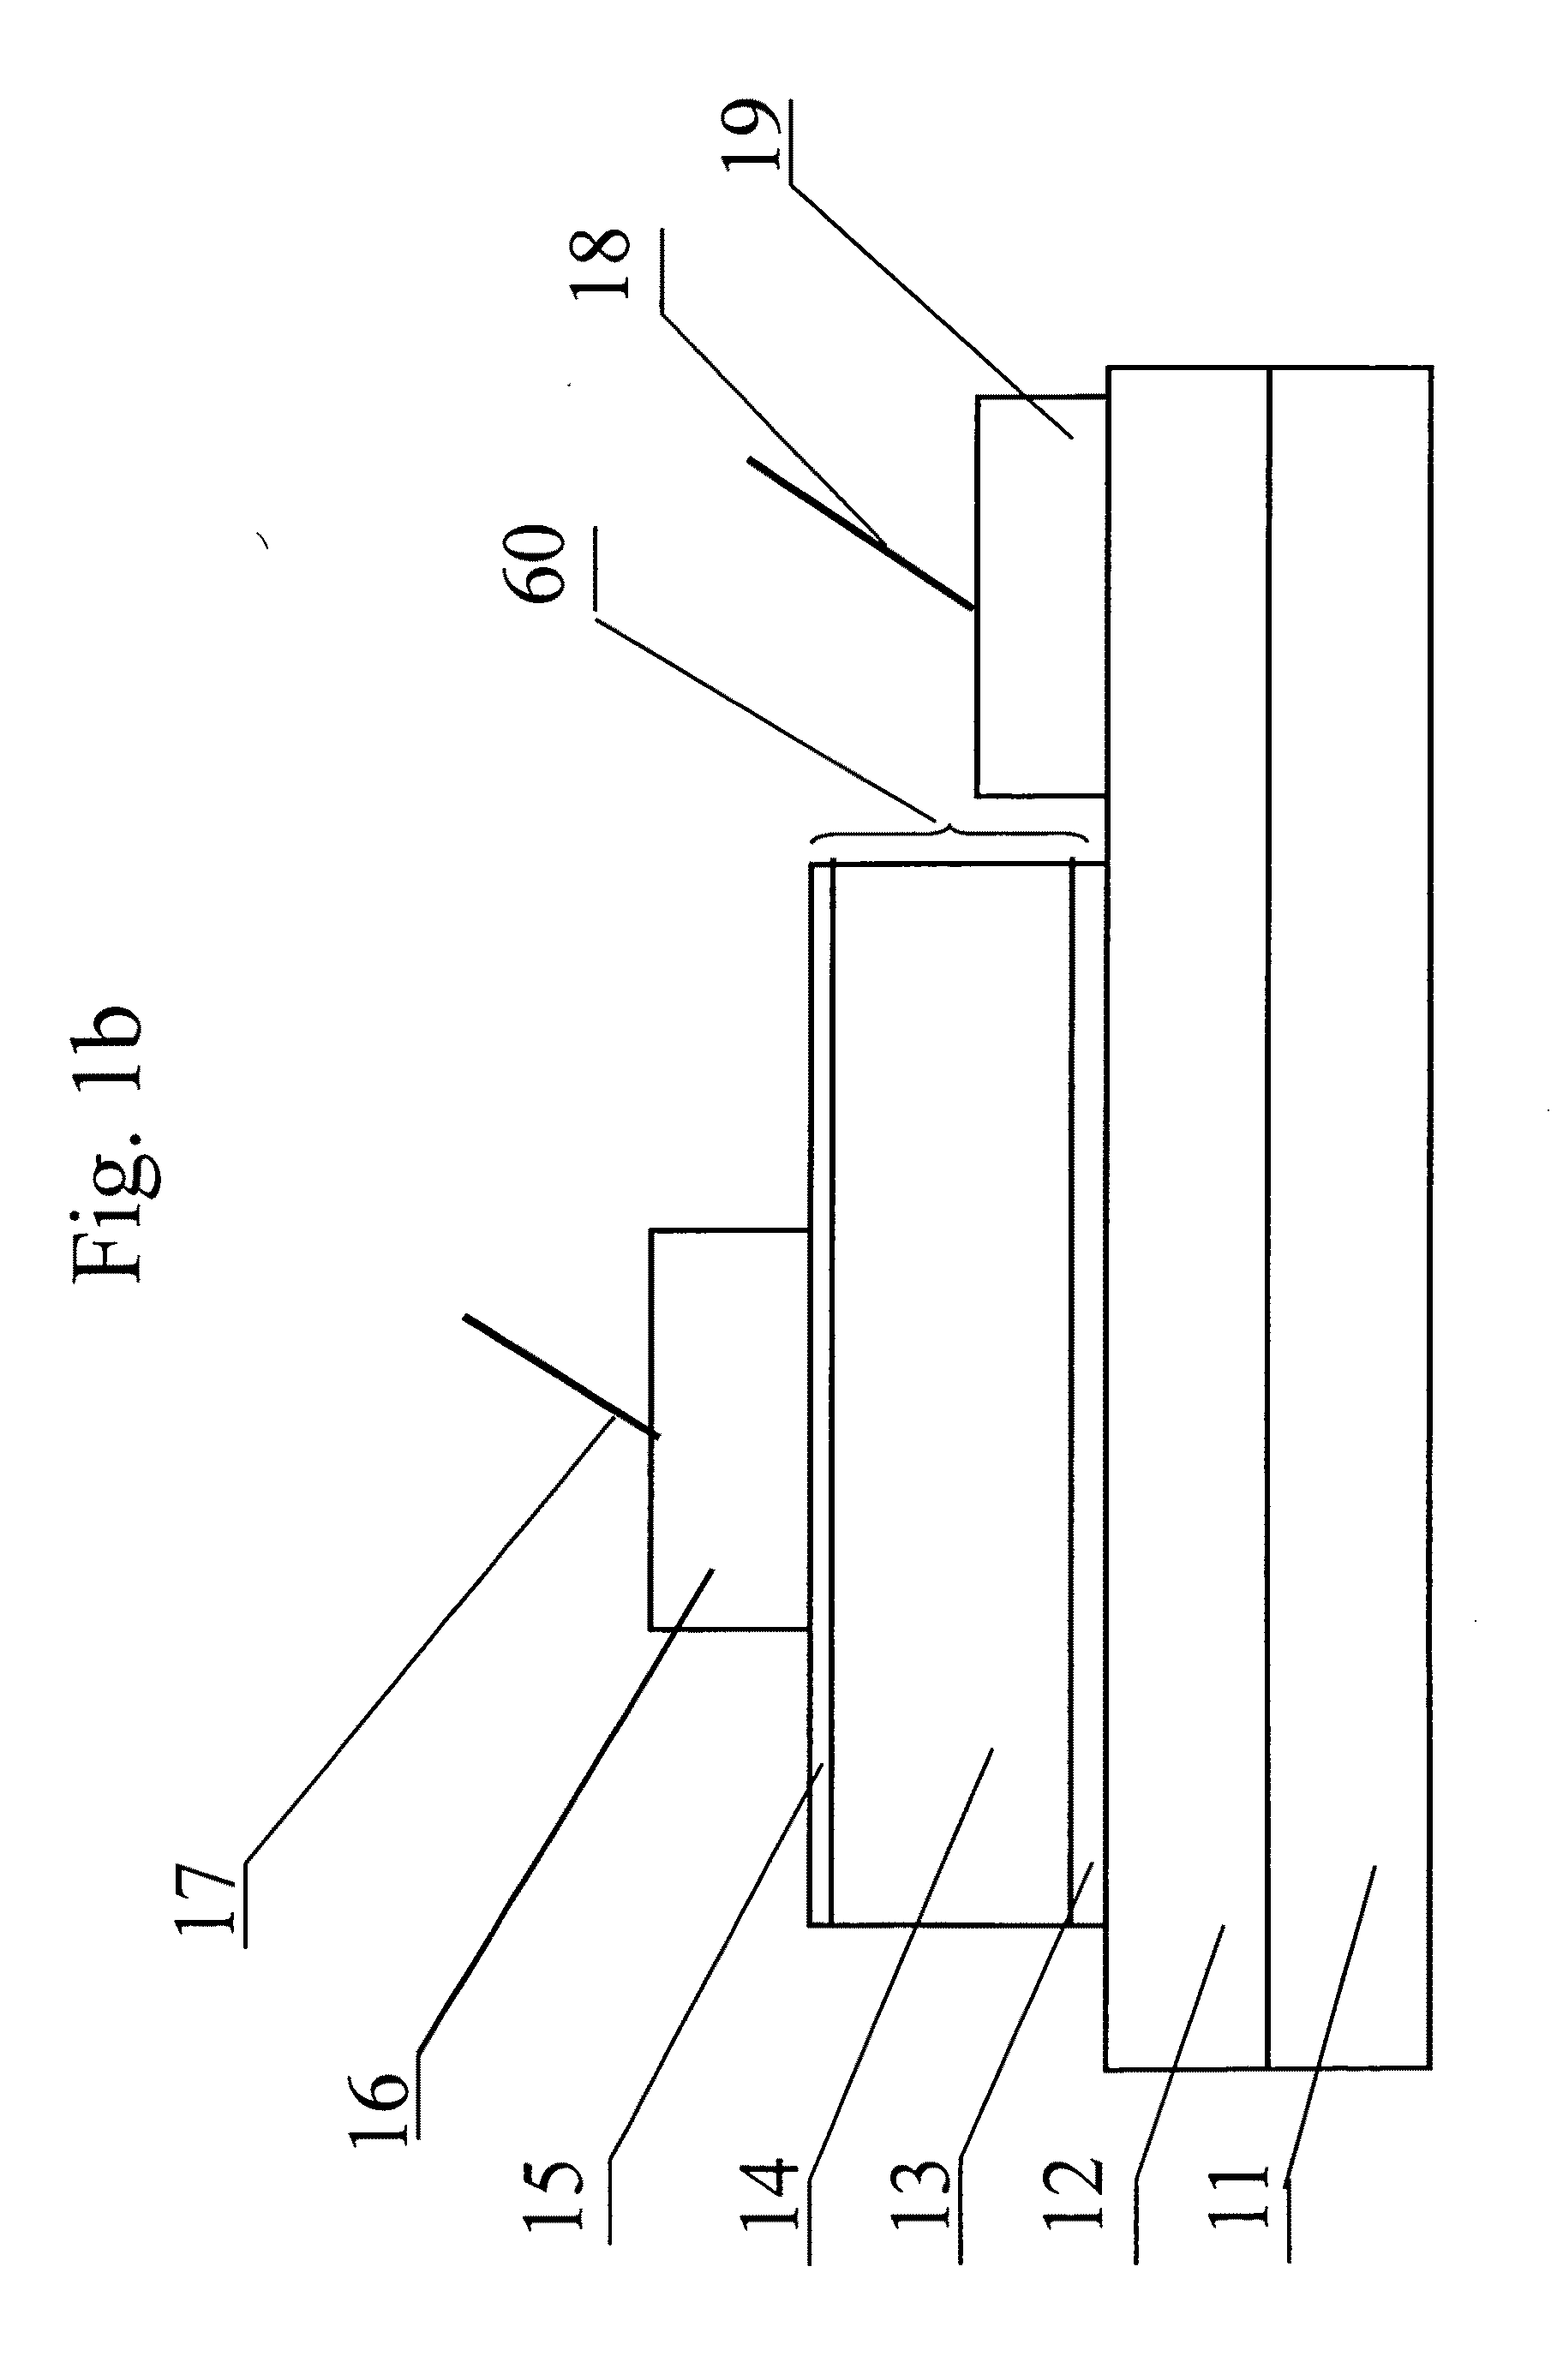 Method of using a buffered electric pulse induced resistance device